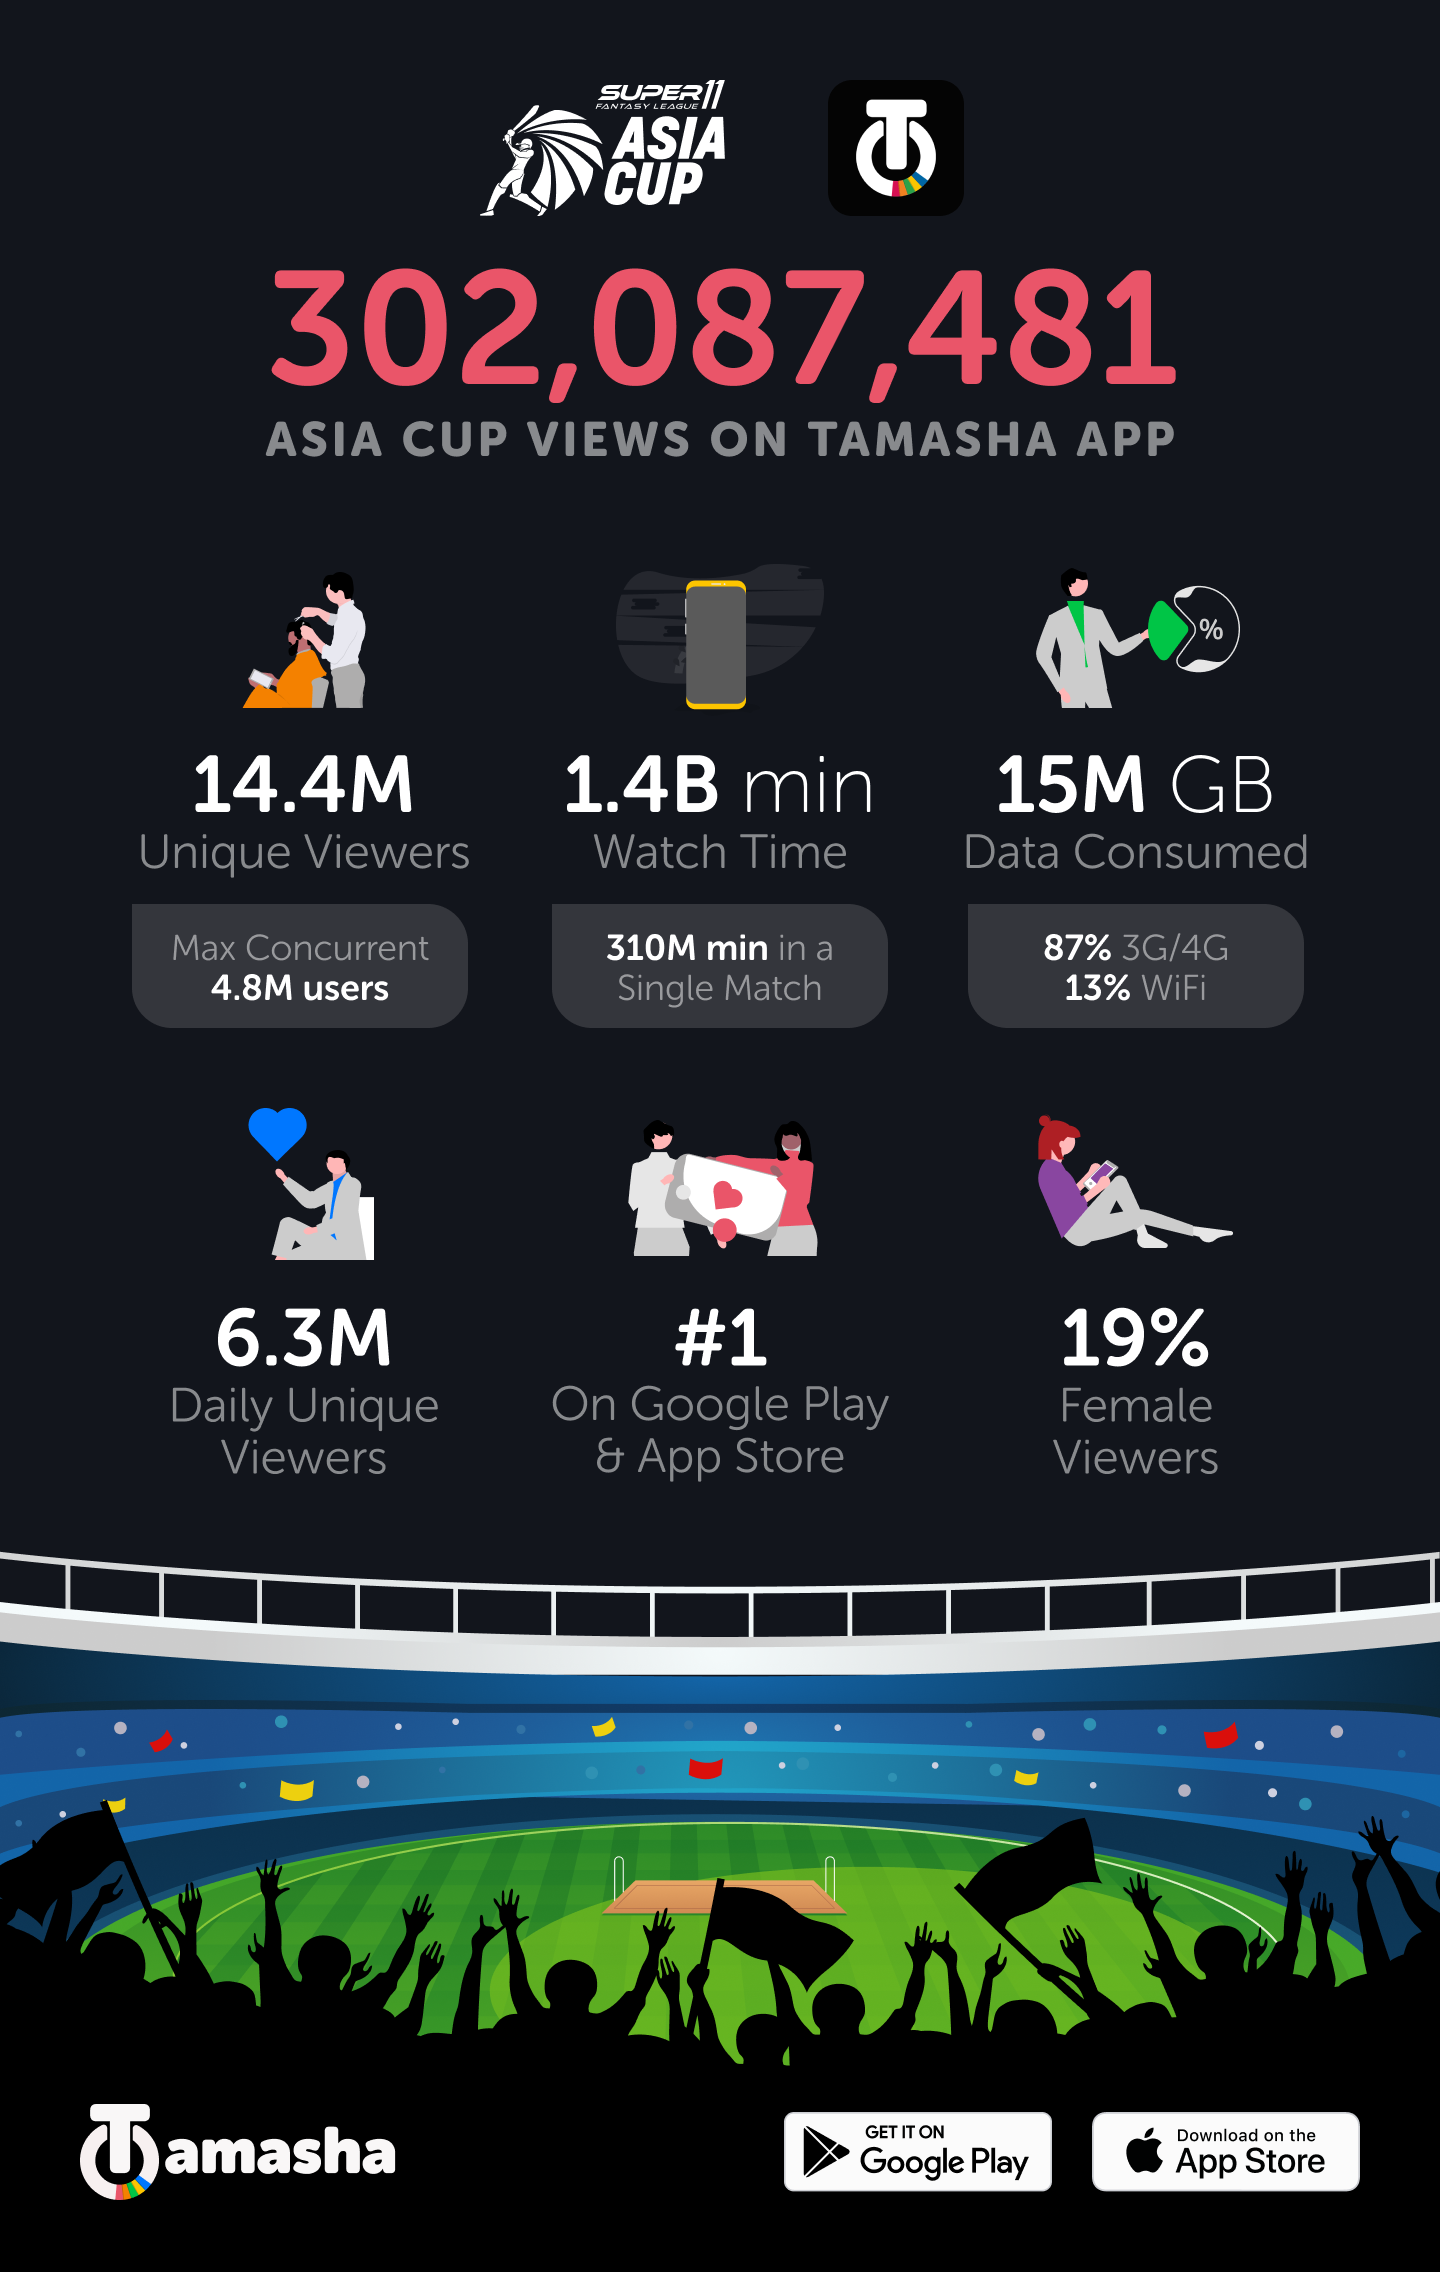 Tamasha Takes Cricket Streaming by Storm in Pakistan